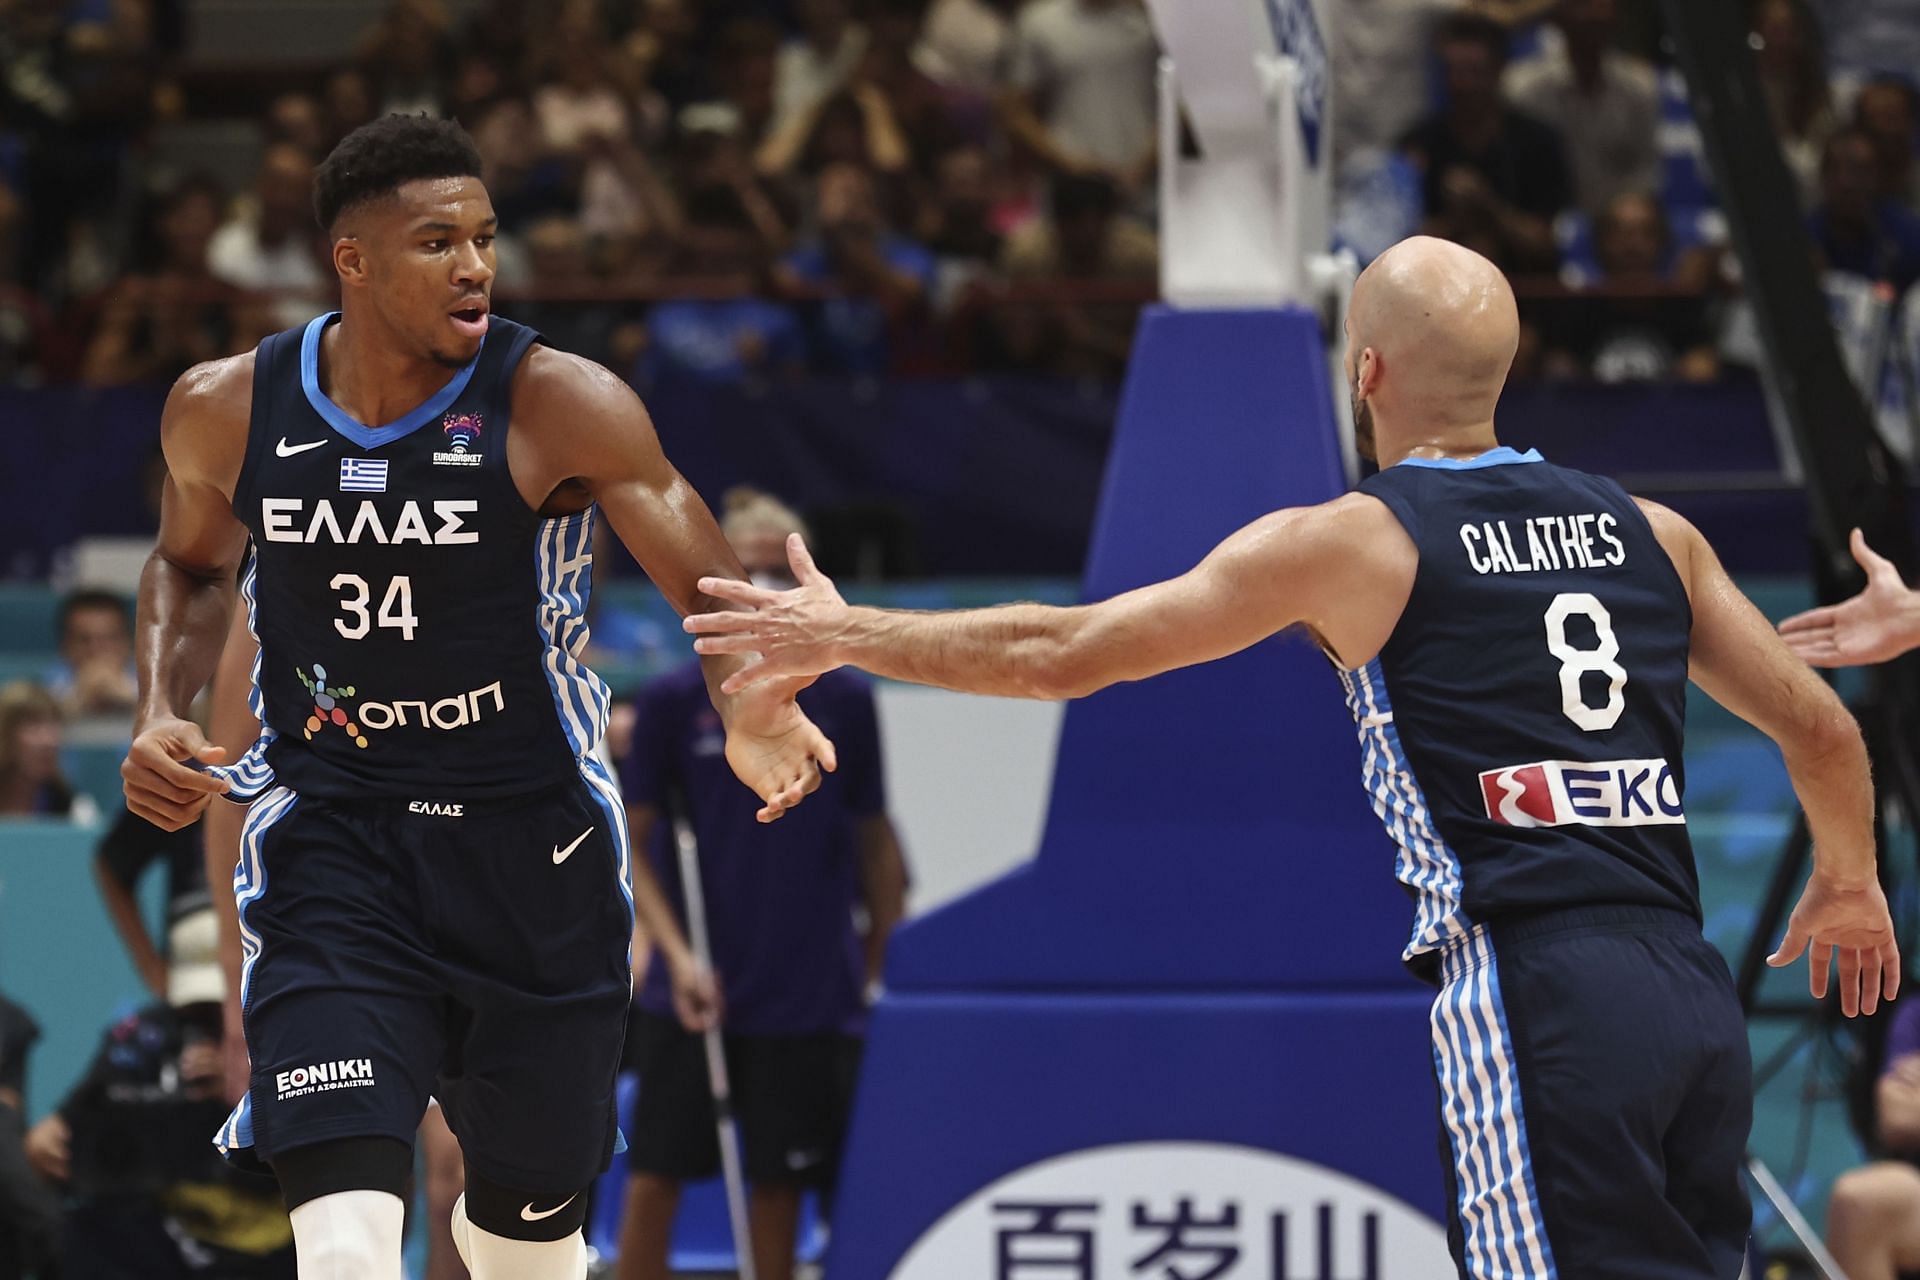 Giannis Antetokounmpo (lefT) and Nick Calathes of Greece